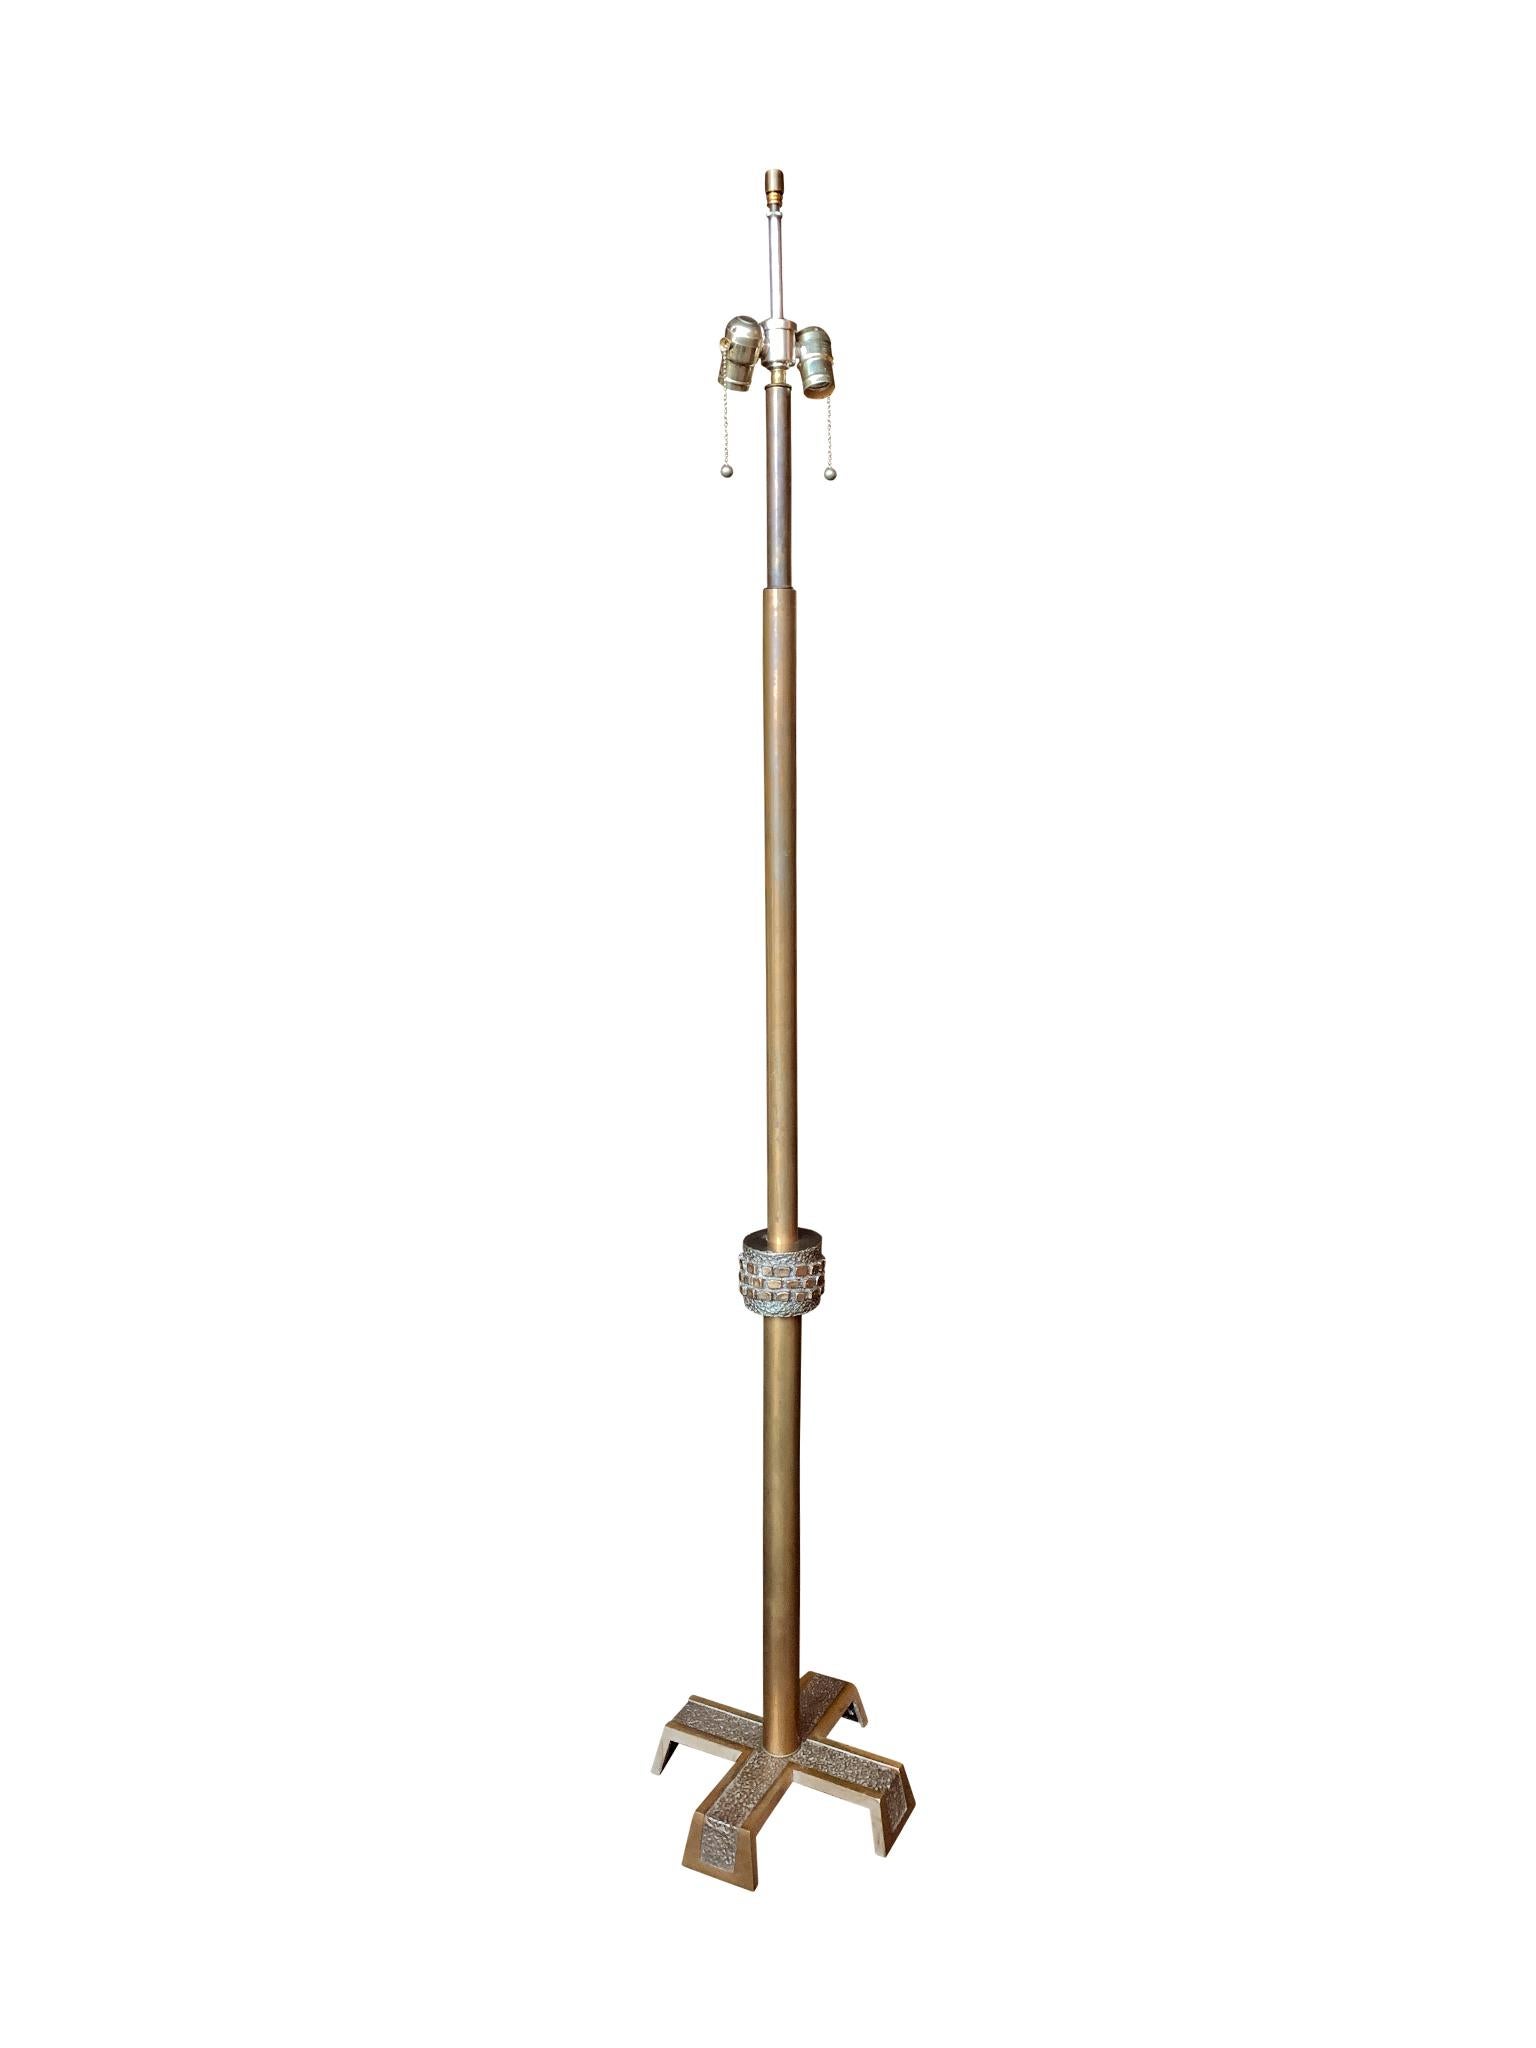 This tall Mid-20th Century Brutalist floor lamp is comprised of a mixed-metal body and custom-fitted with a new line shade. Characteristic of the Brutalist style, the design is minimalist with sparse but striking adornment that evoke rough,